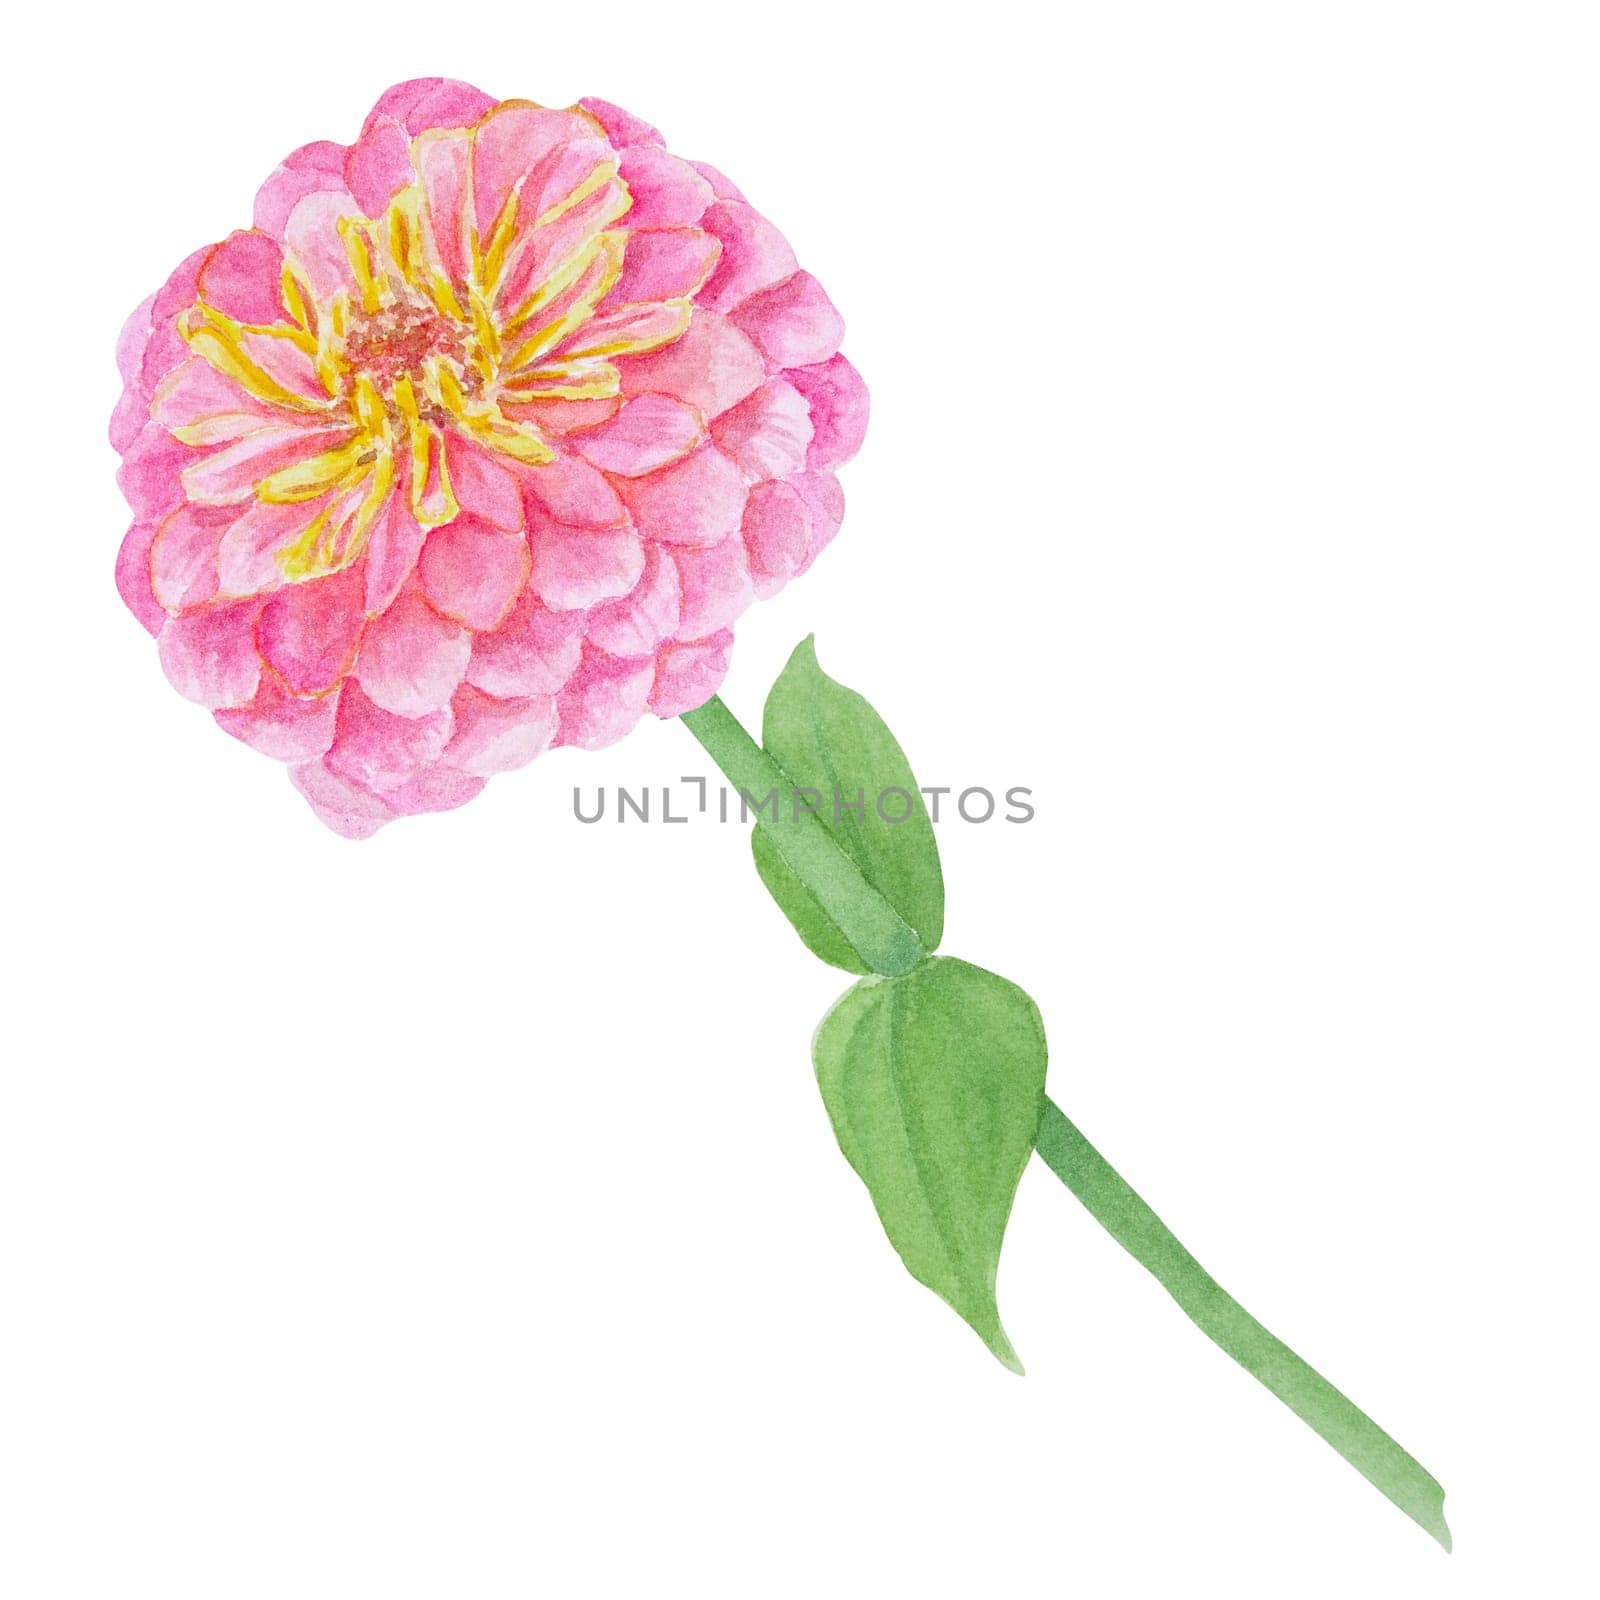 Garden pink Zinnia watercolor illustration. Hand drawn botanical painting, floral sketch. Colorful flower clipart for summer or autumn design of wedding invitation, prints, greetings, sublimation, textile